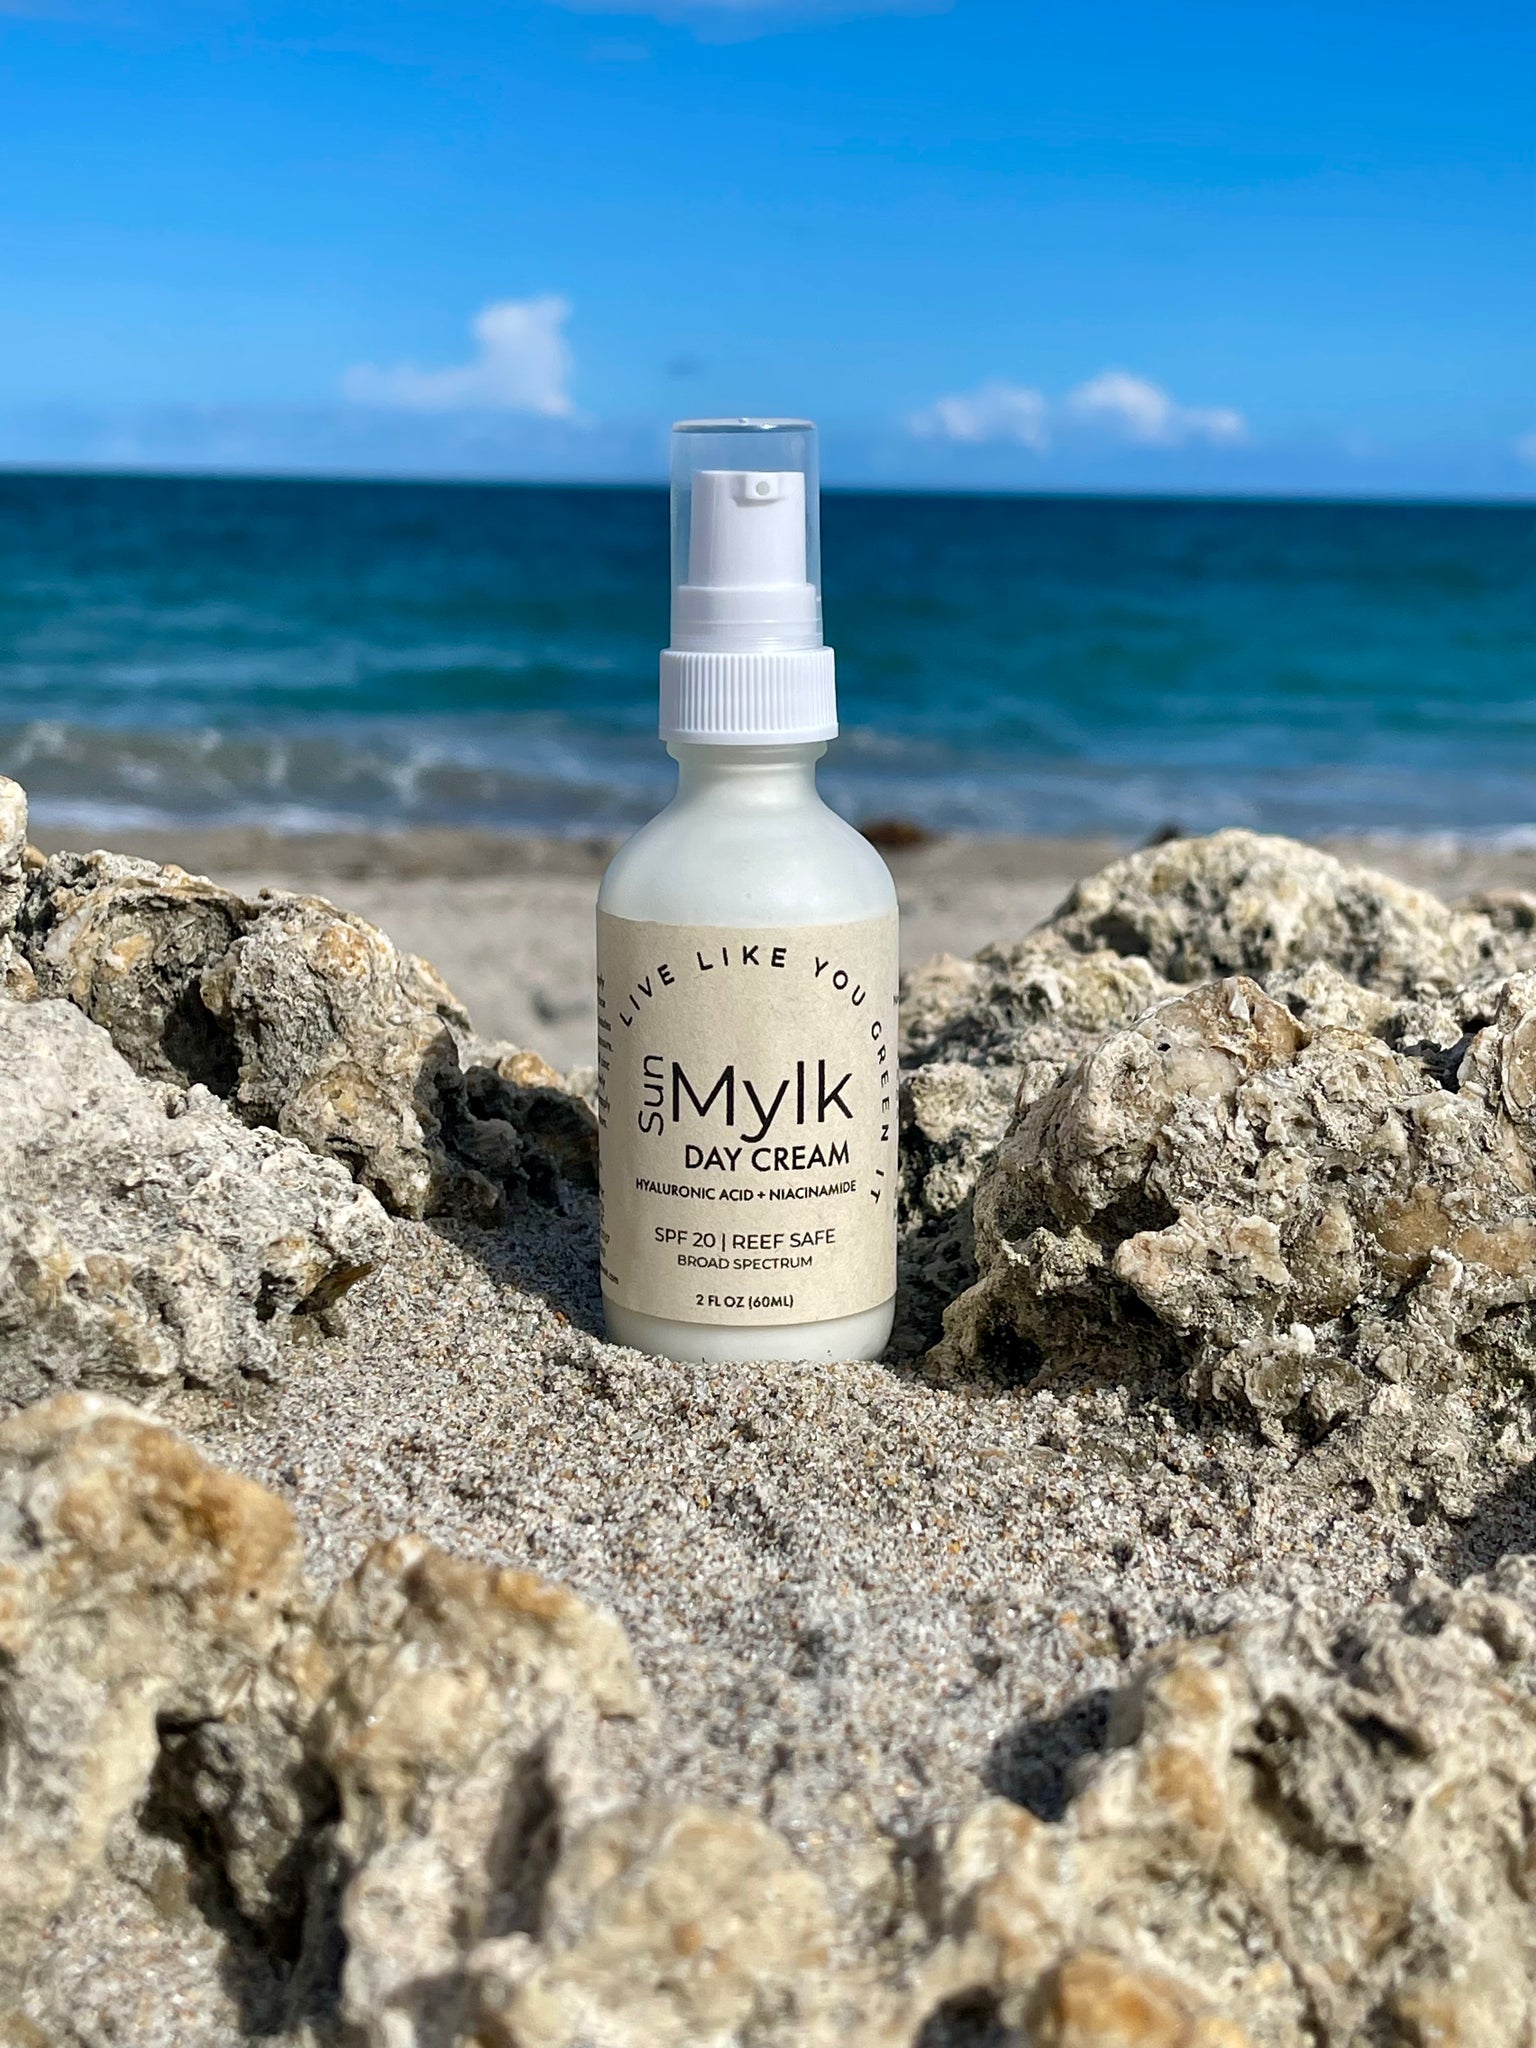 Sunscreen: Sun Mylk Day Cream with Mineral SPF, Hyaluronic Acid + Niacinamide (B3) Live Like You Green It